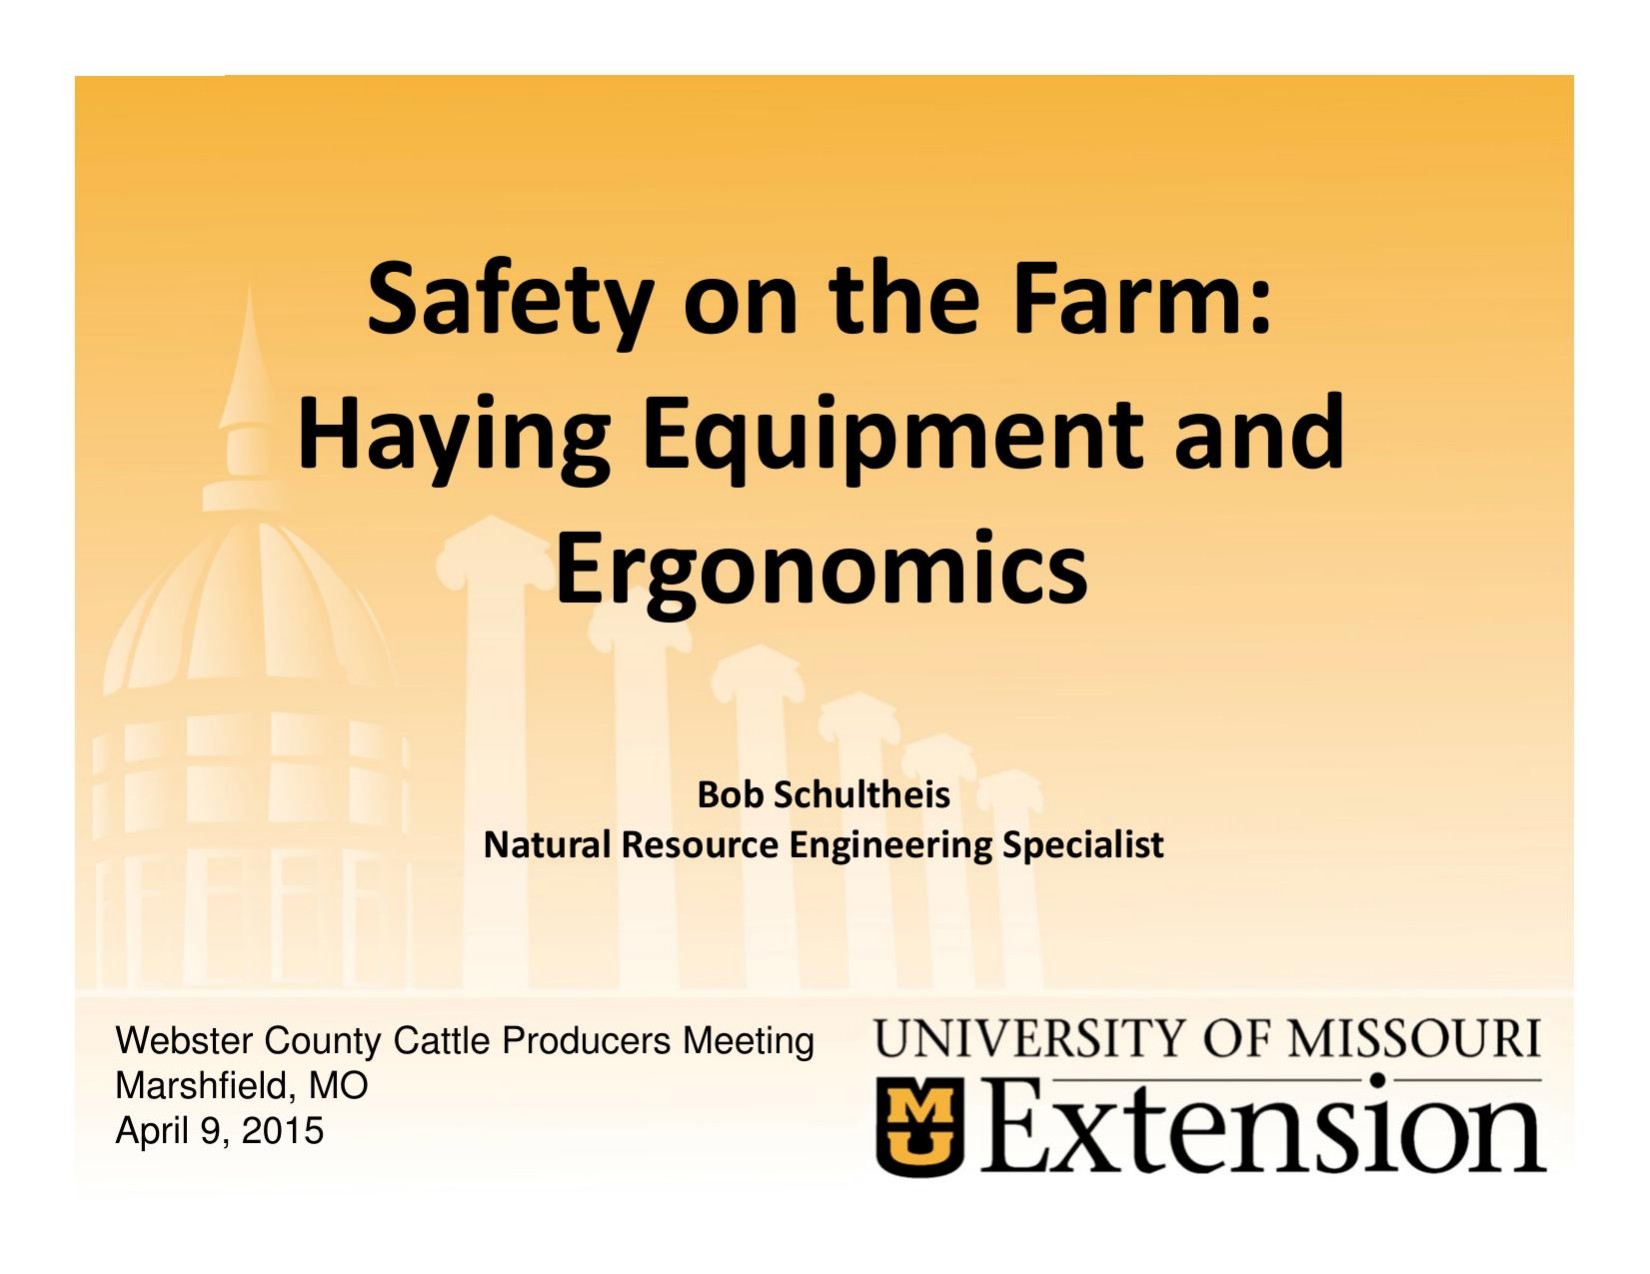 Microsoft PowerPoint - 2015-04-09_Safety_on_the_Farm-Haying_Equipment_Ergonomics-Bob_Schultheis.pptx [Recovered]